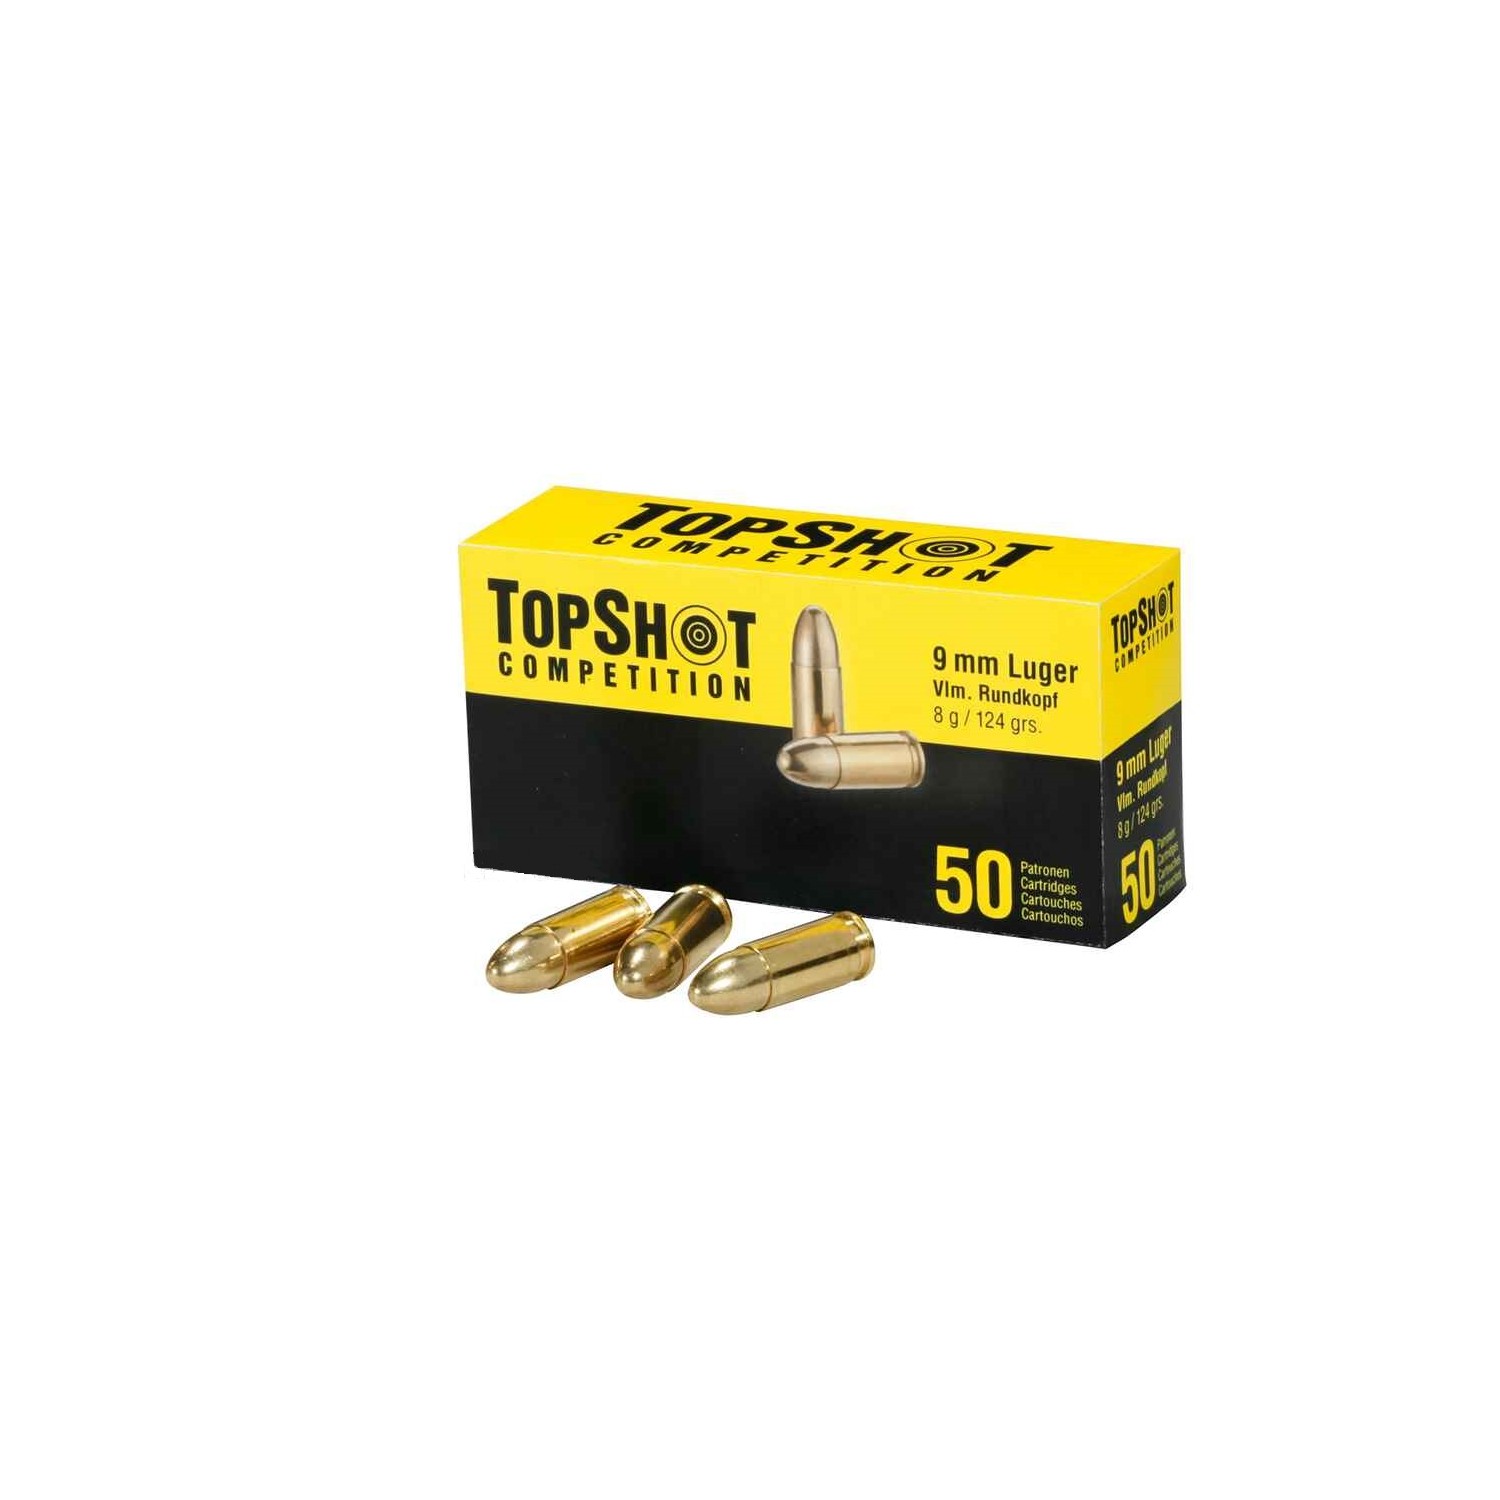 9 mm Luger Vollmantel 8,0 g/124 grs. TOPSHOT Competition